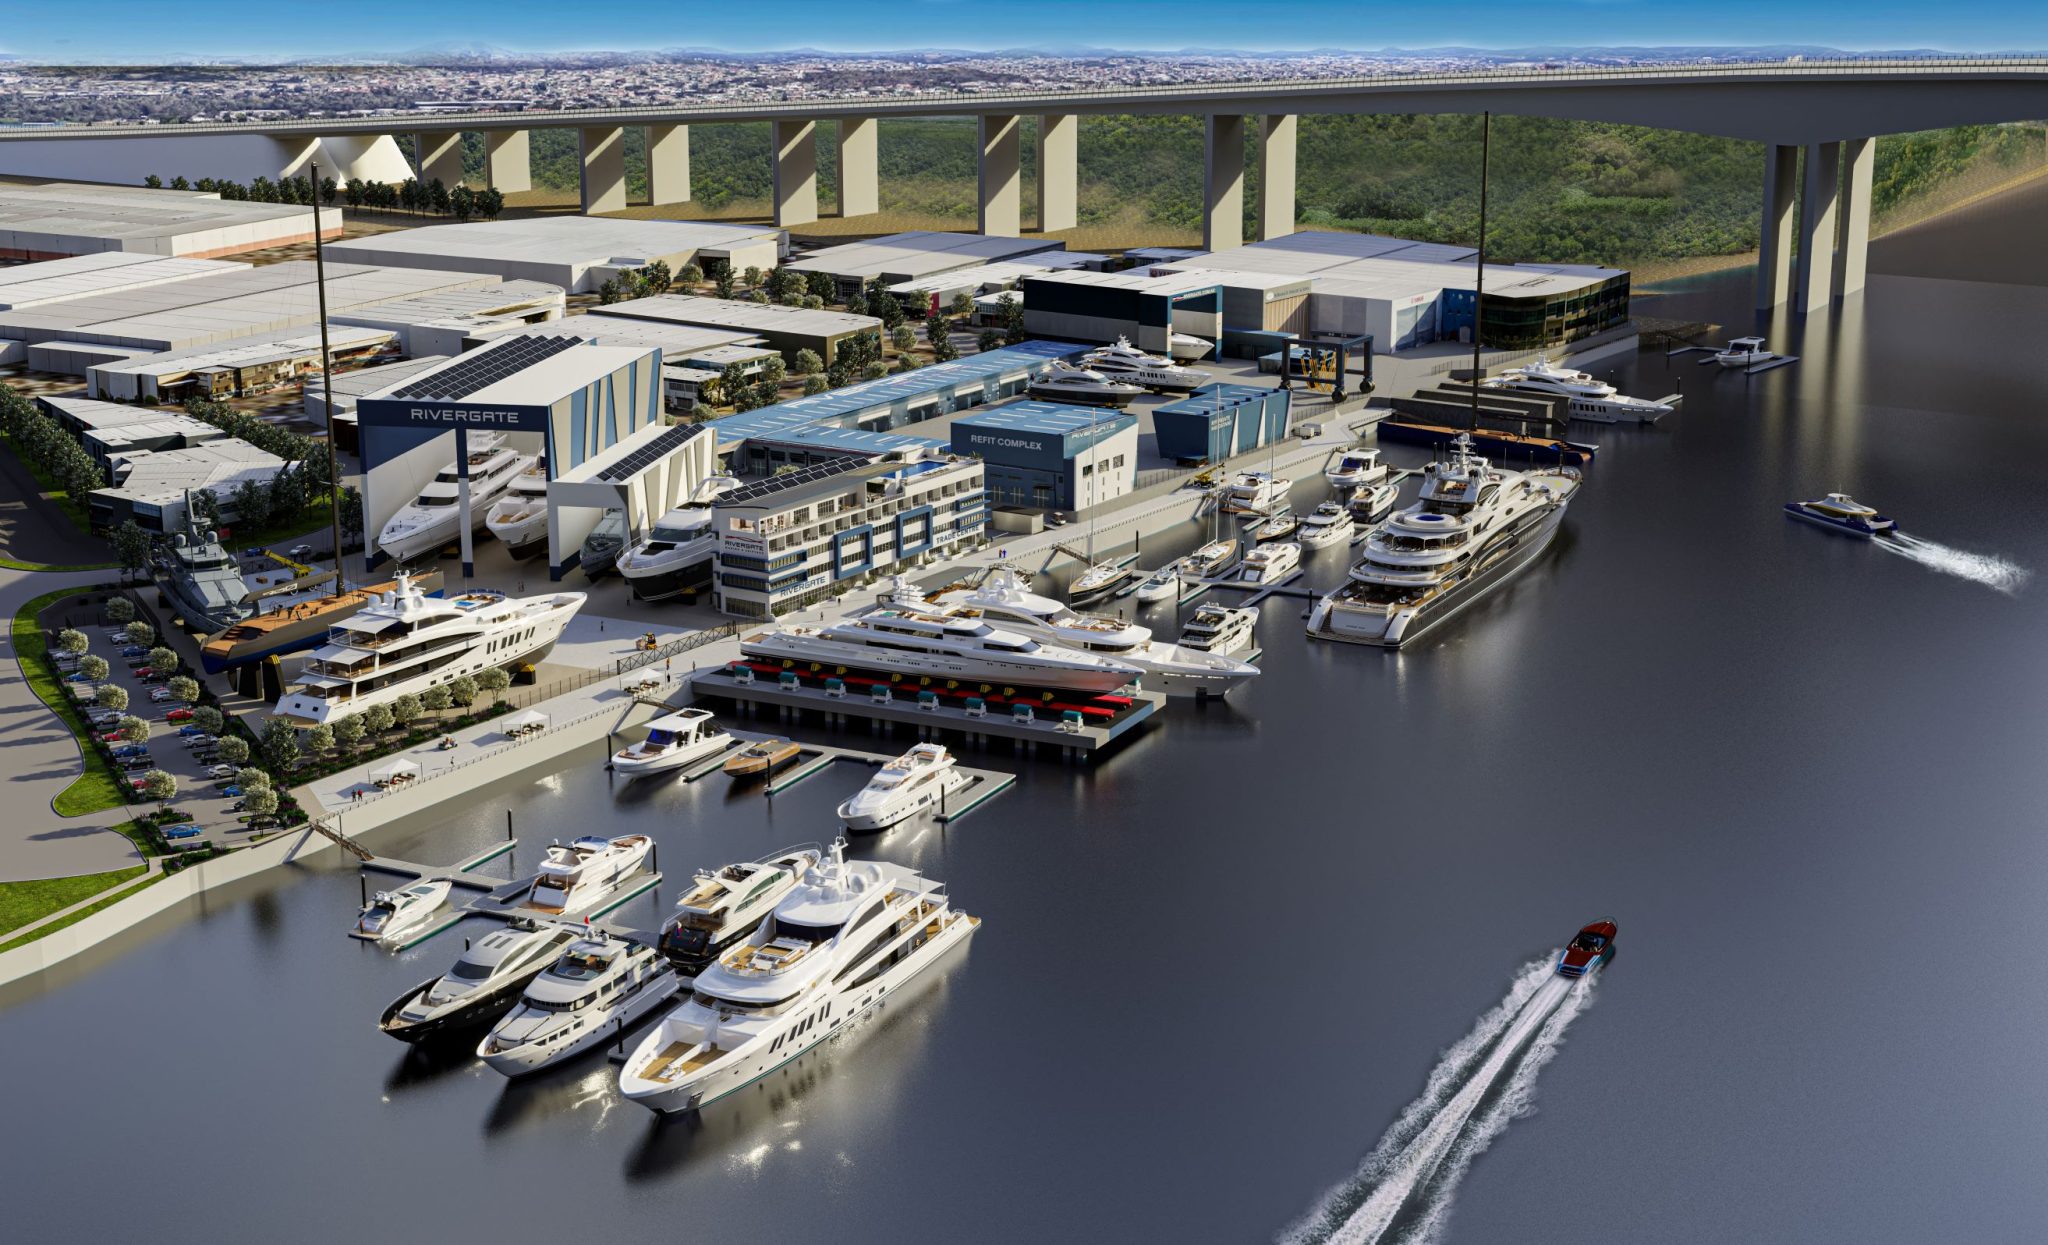 World-leading $200m Brisbane Marina Expansion Wins Council Approval, creating 2,000 jobs.